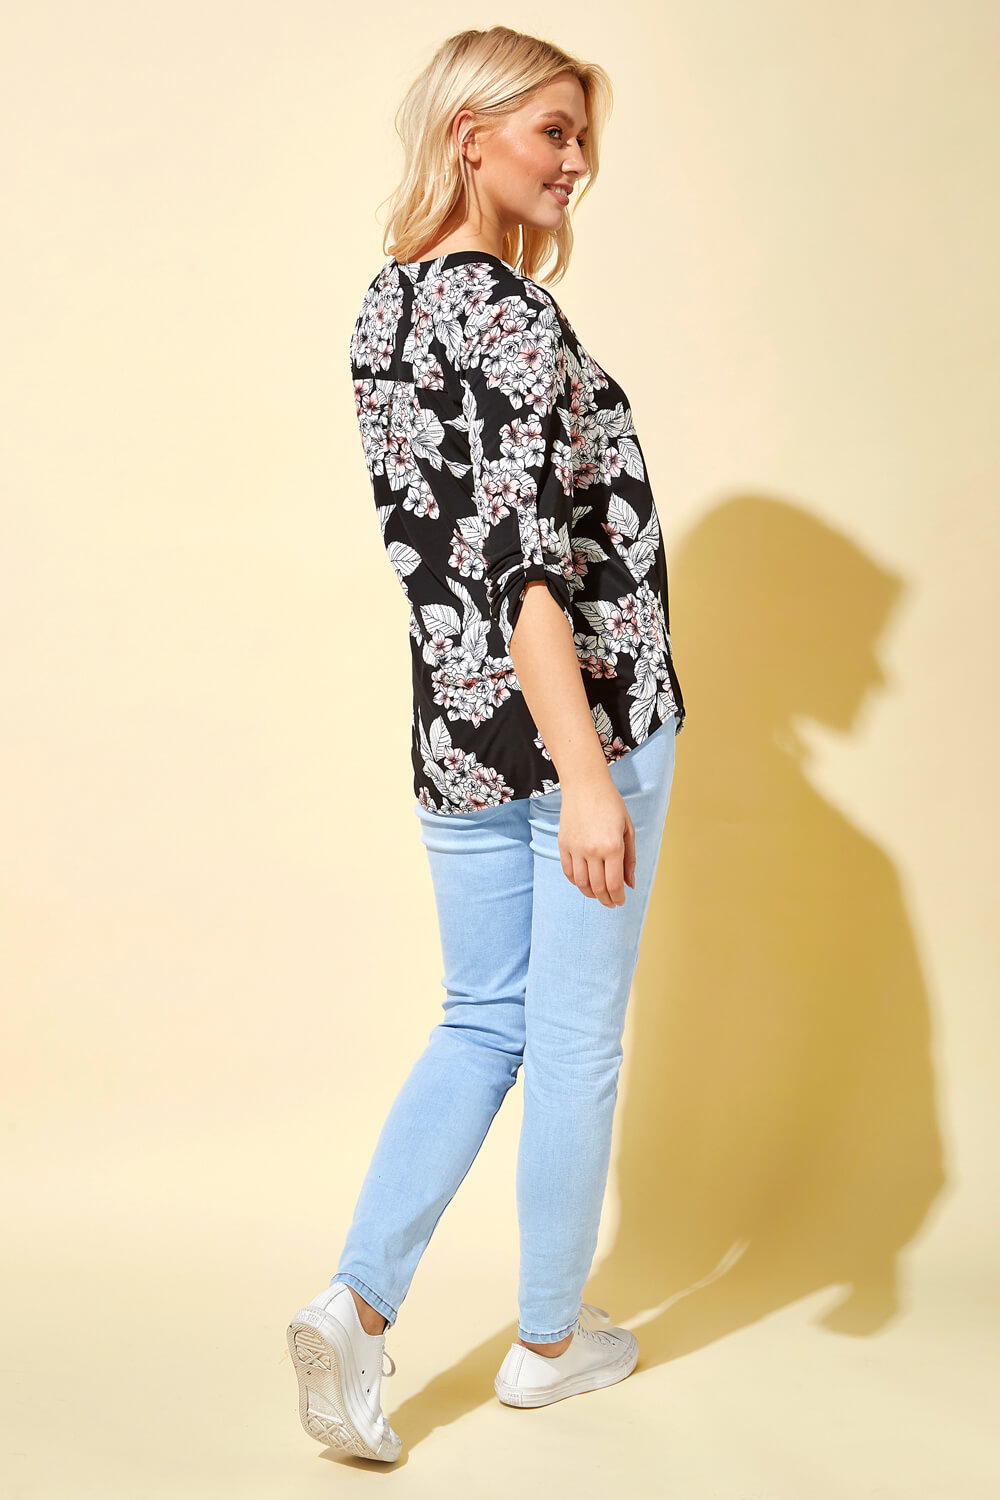 CORAL Floral Cluster Print Notch Neck Top, Image 2 of 4